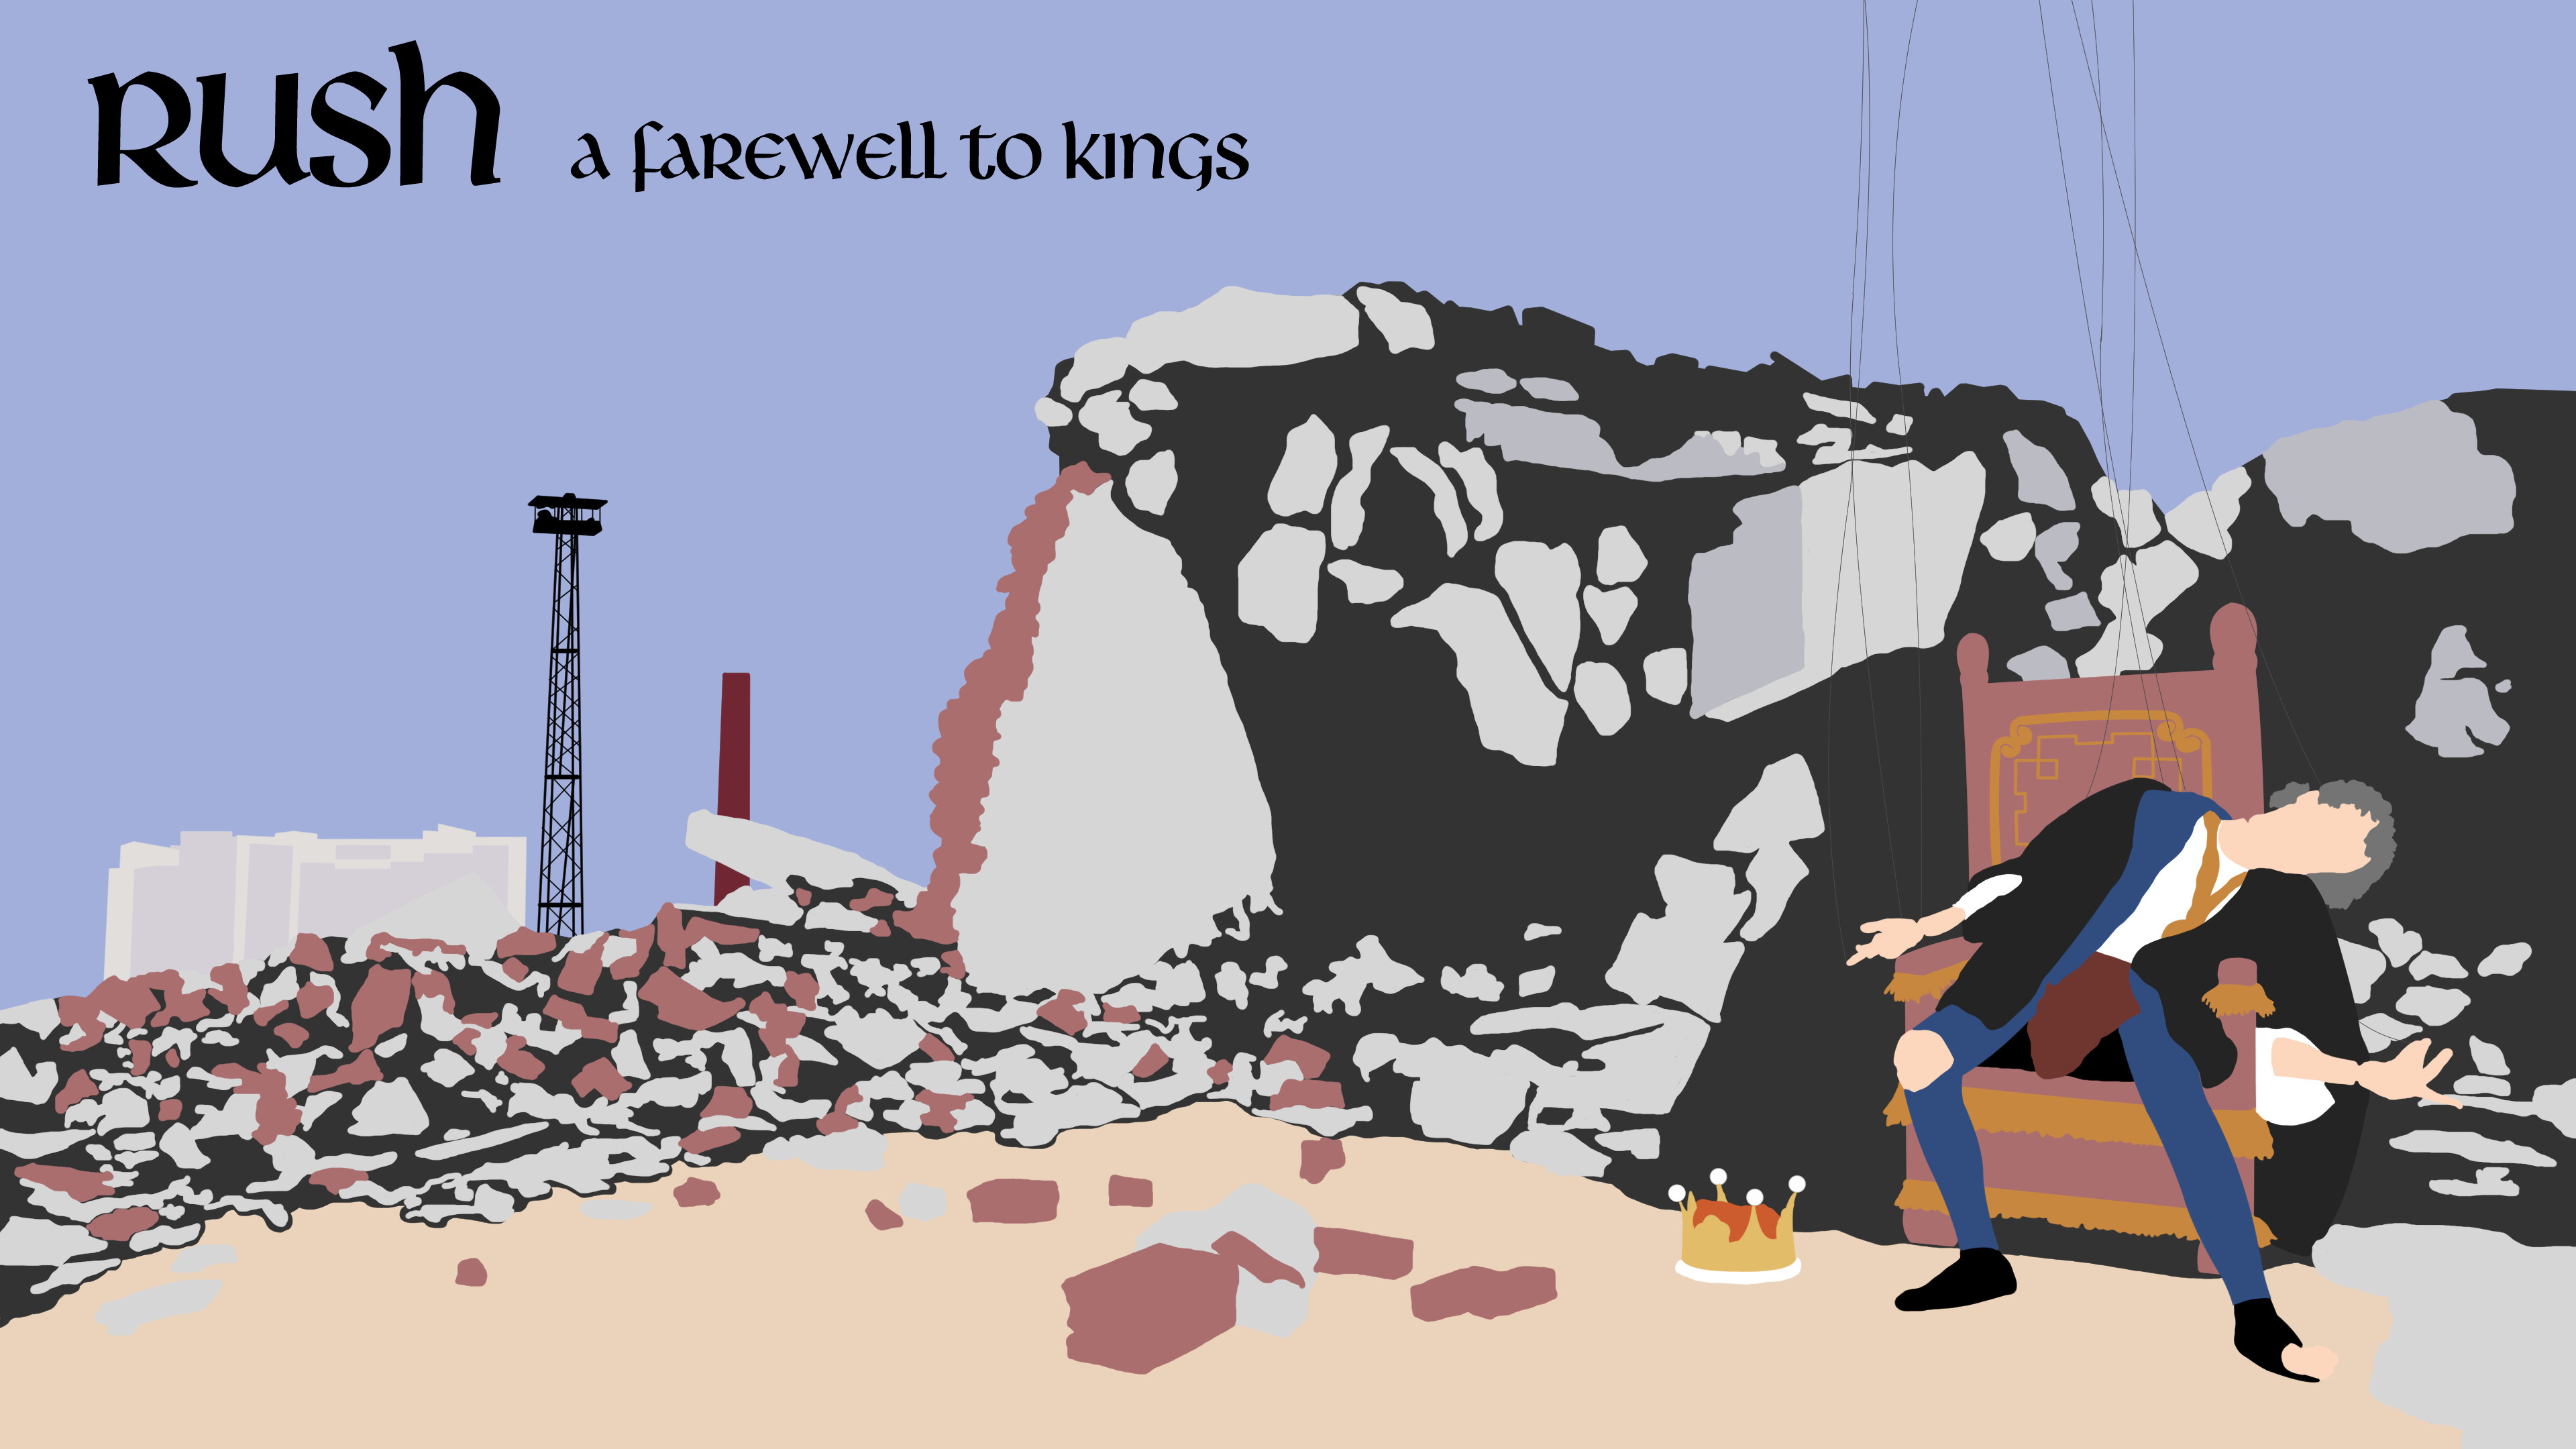 Got snowed in this 's a new Rush wallpaper! A Farewell to Kings : r/rush 3840x2160